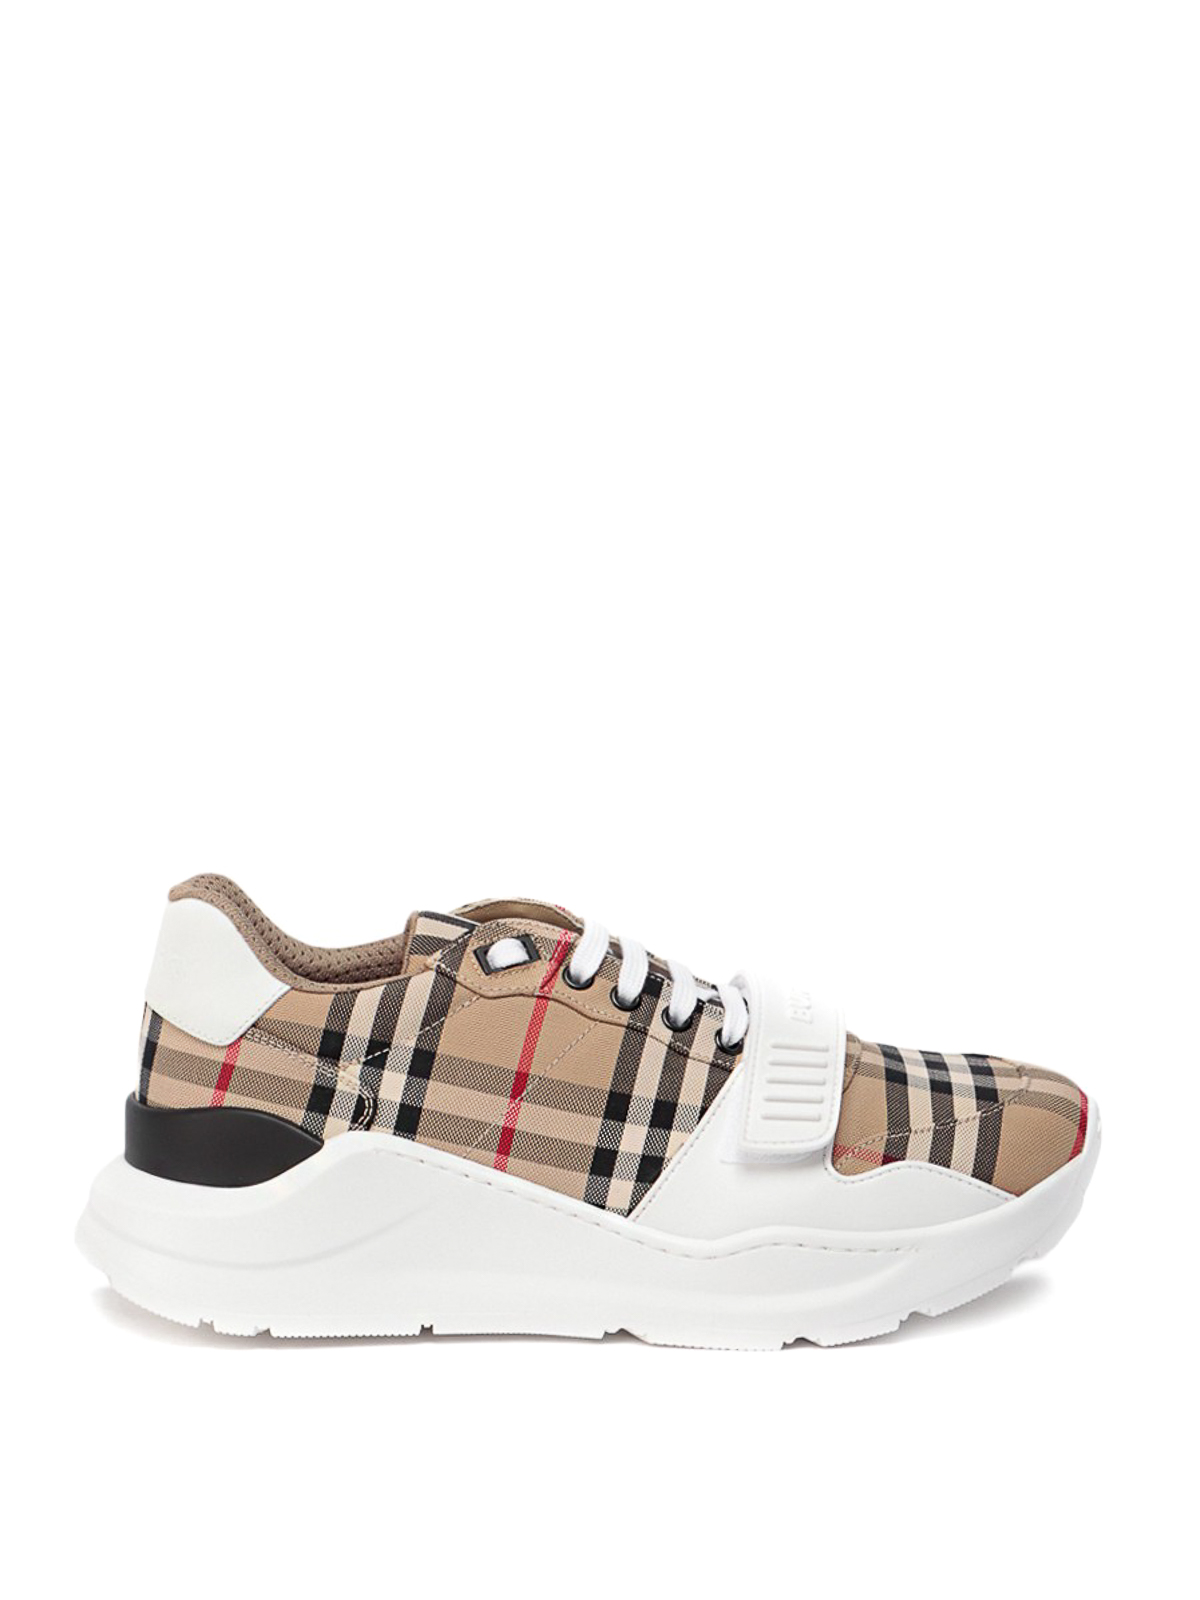 Burberry Trainers Con Motivo Vintage Check In Beige